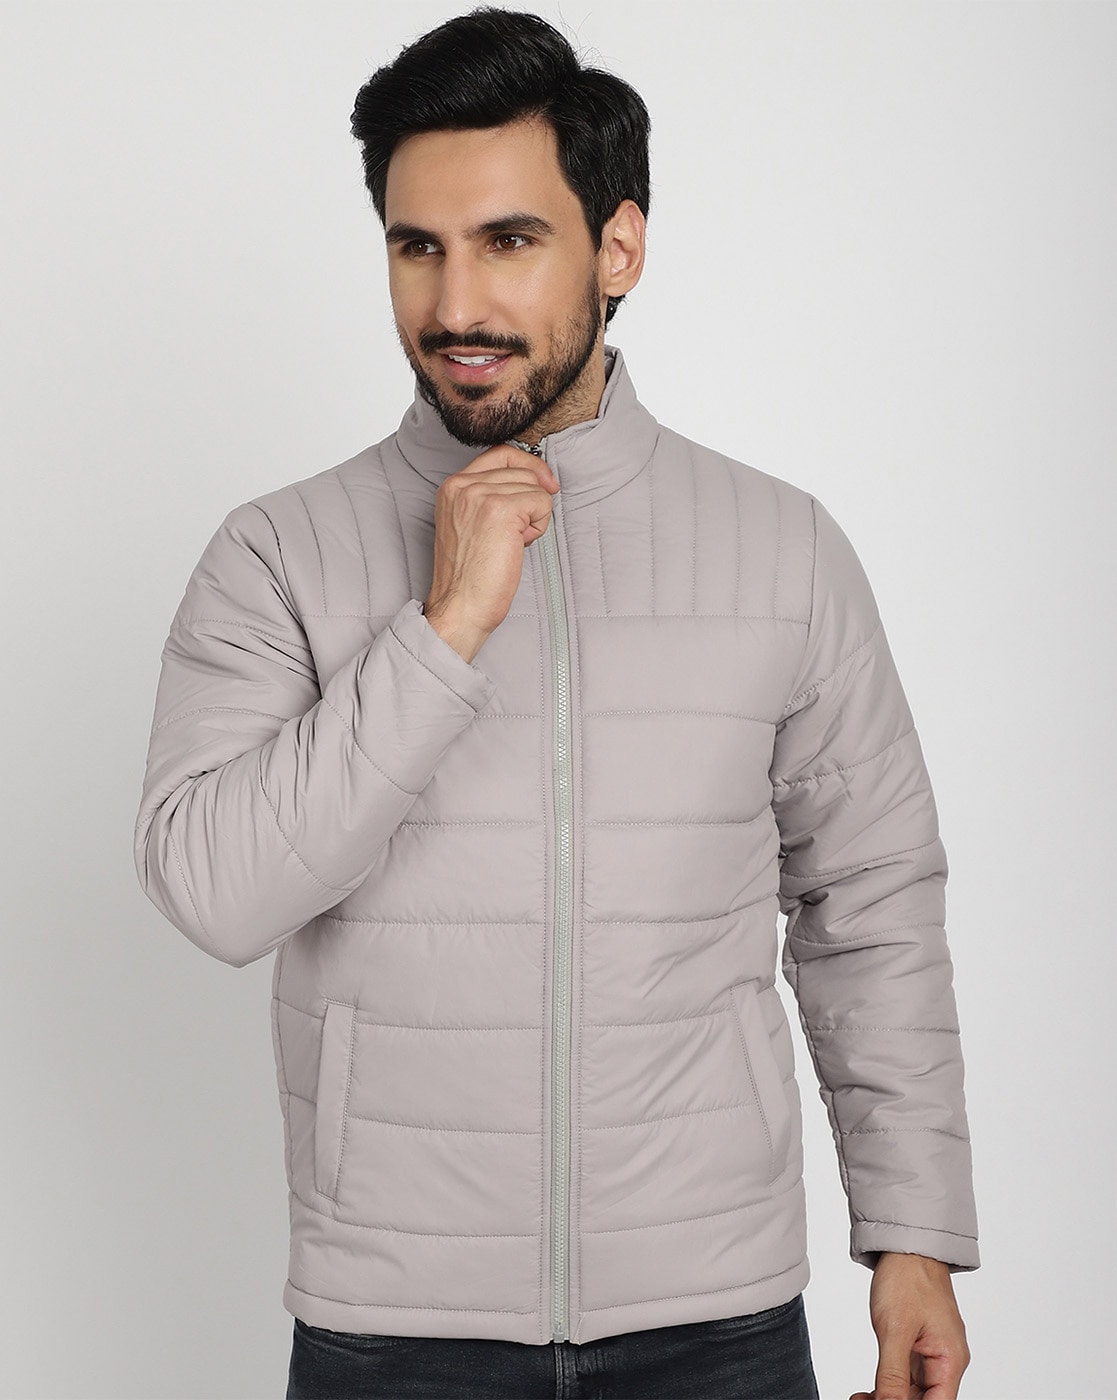 MEN DOUBLE BREASTED HEAVY JACKET IN LIGHT GREY FELTED WHOOL